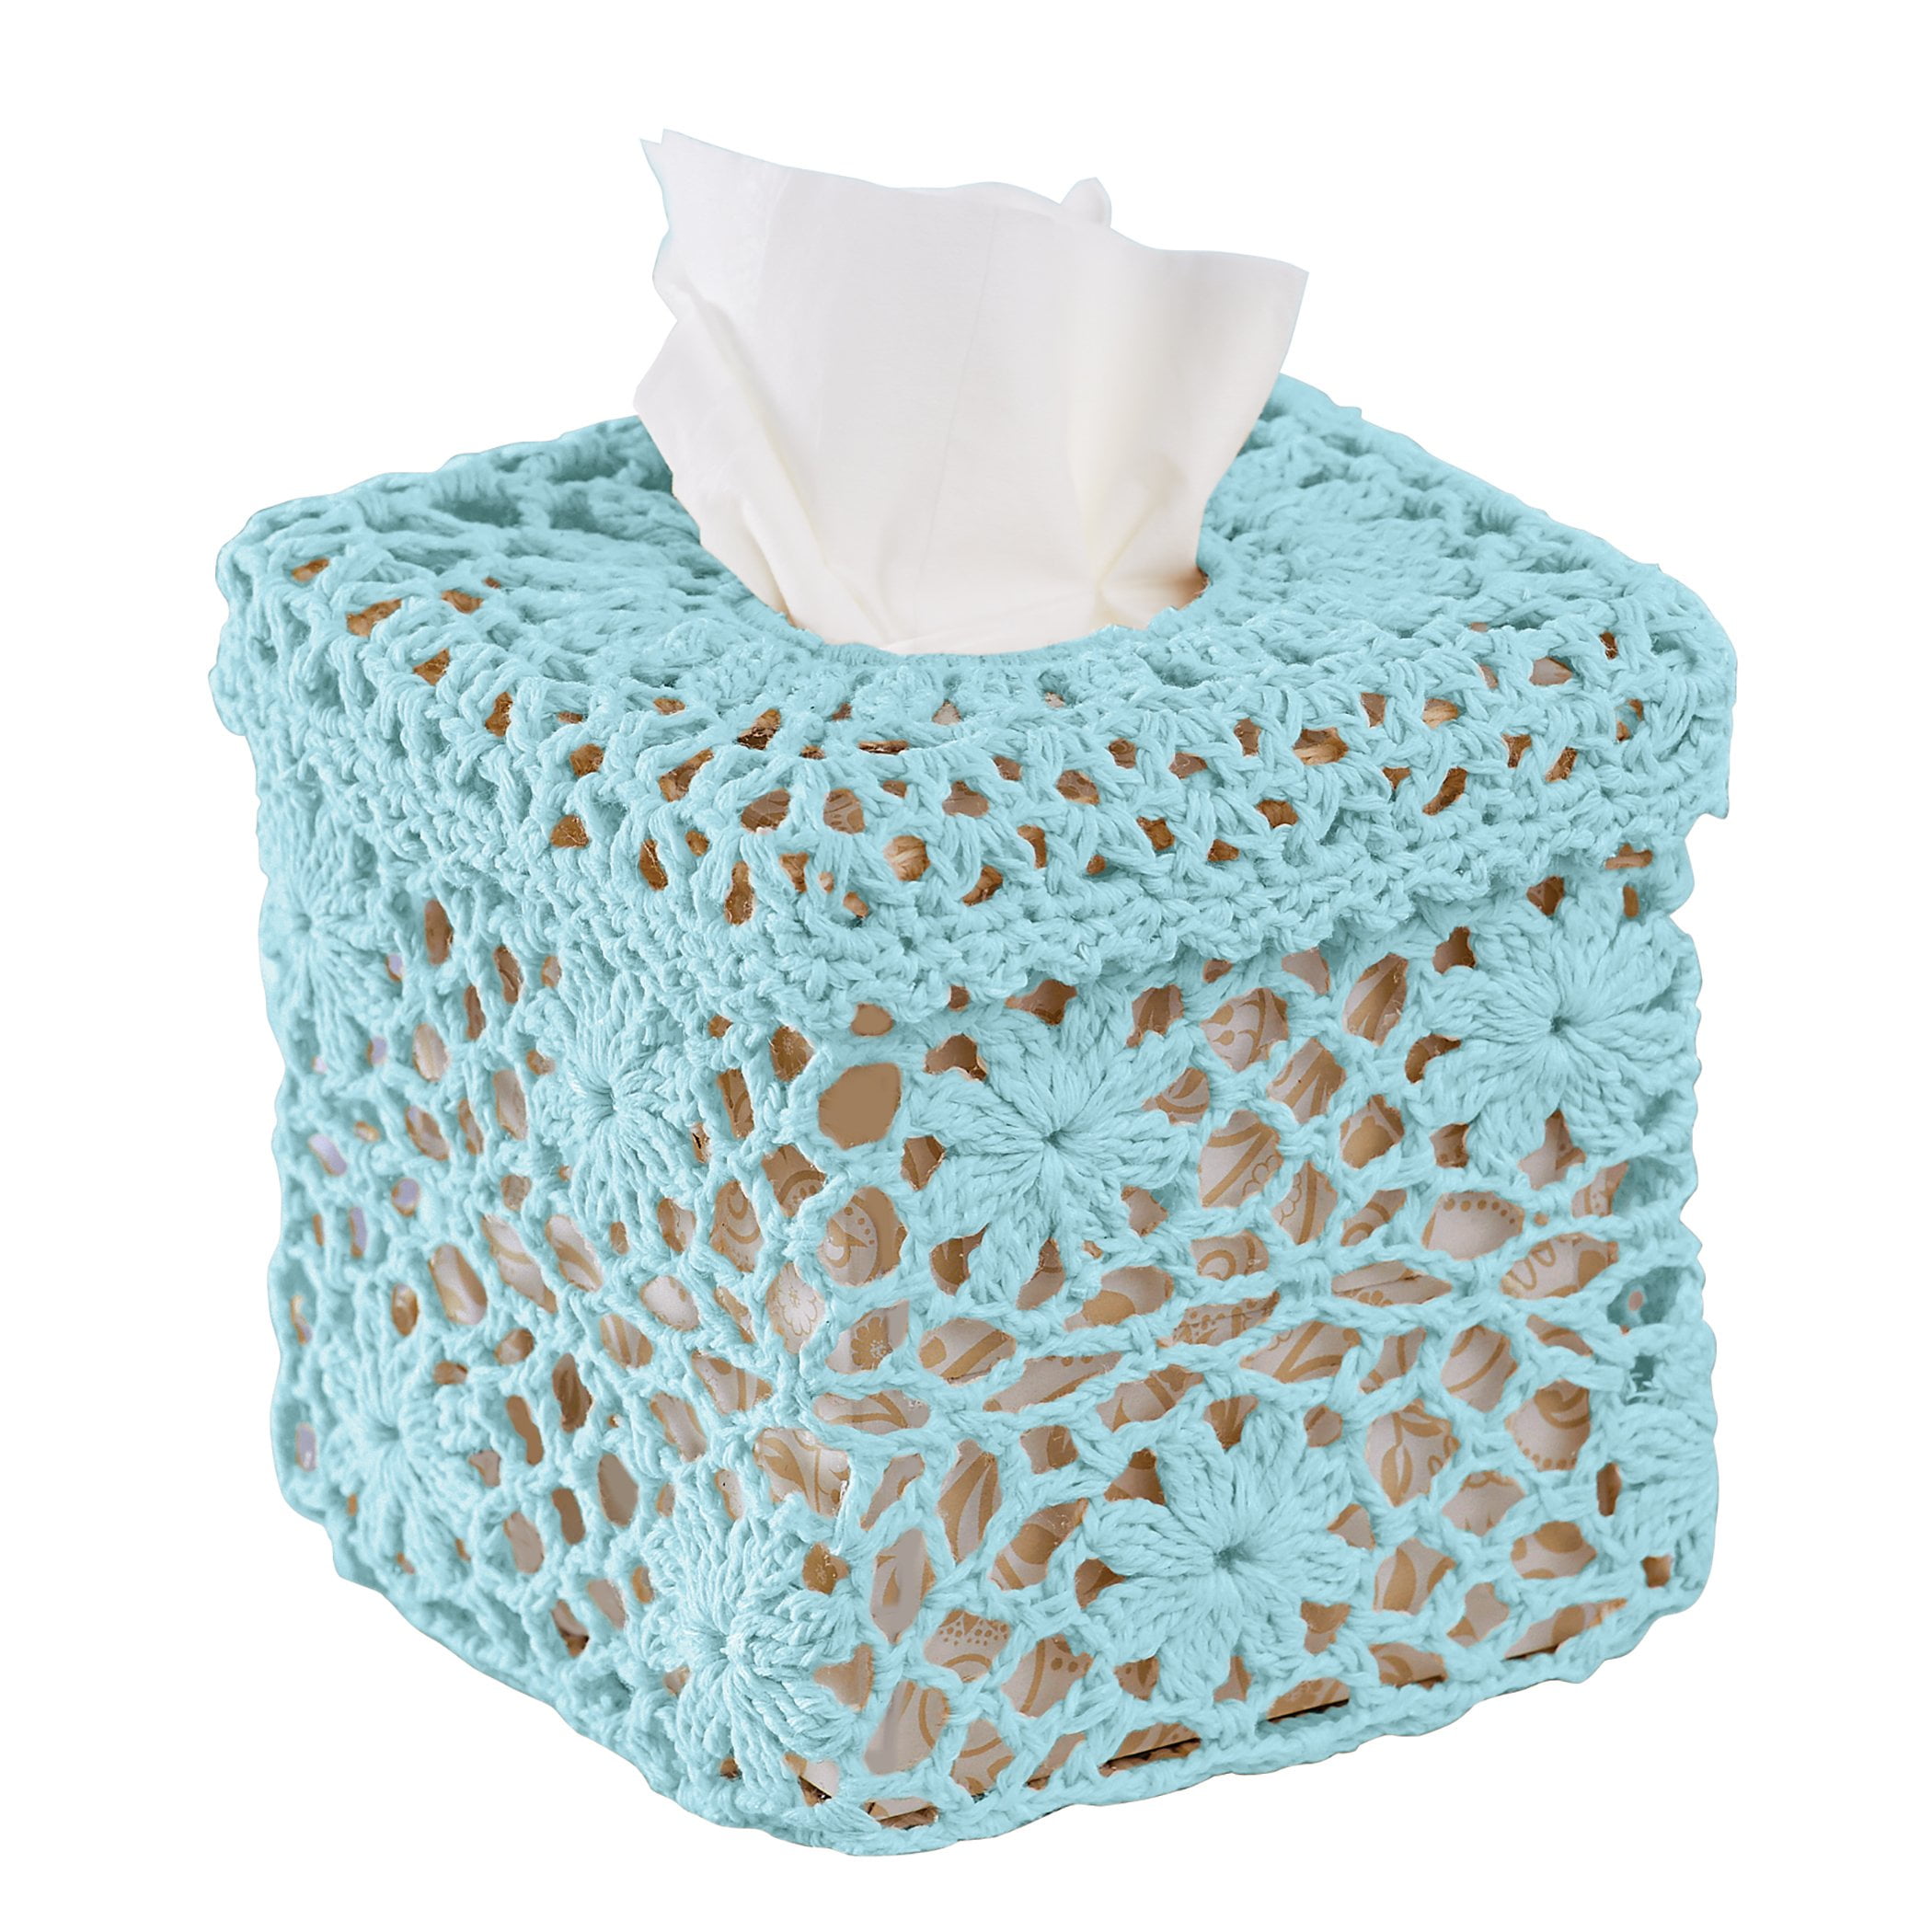 Crochet Boutique Flower Patterned Tissue Box Cover